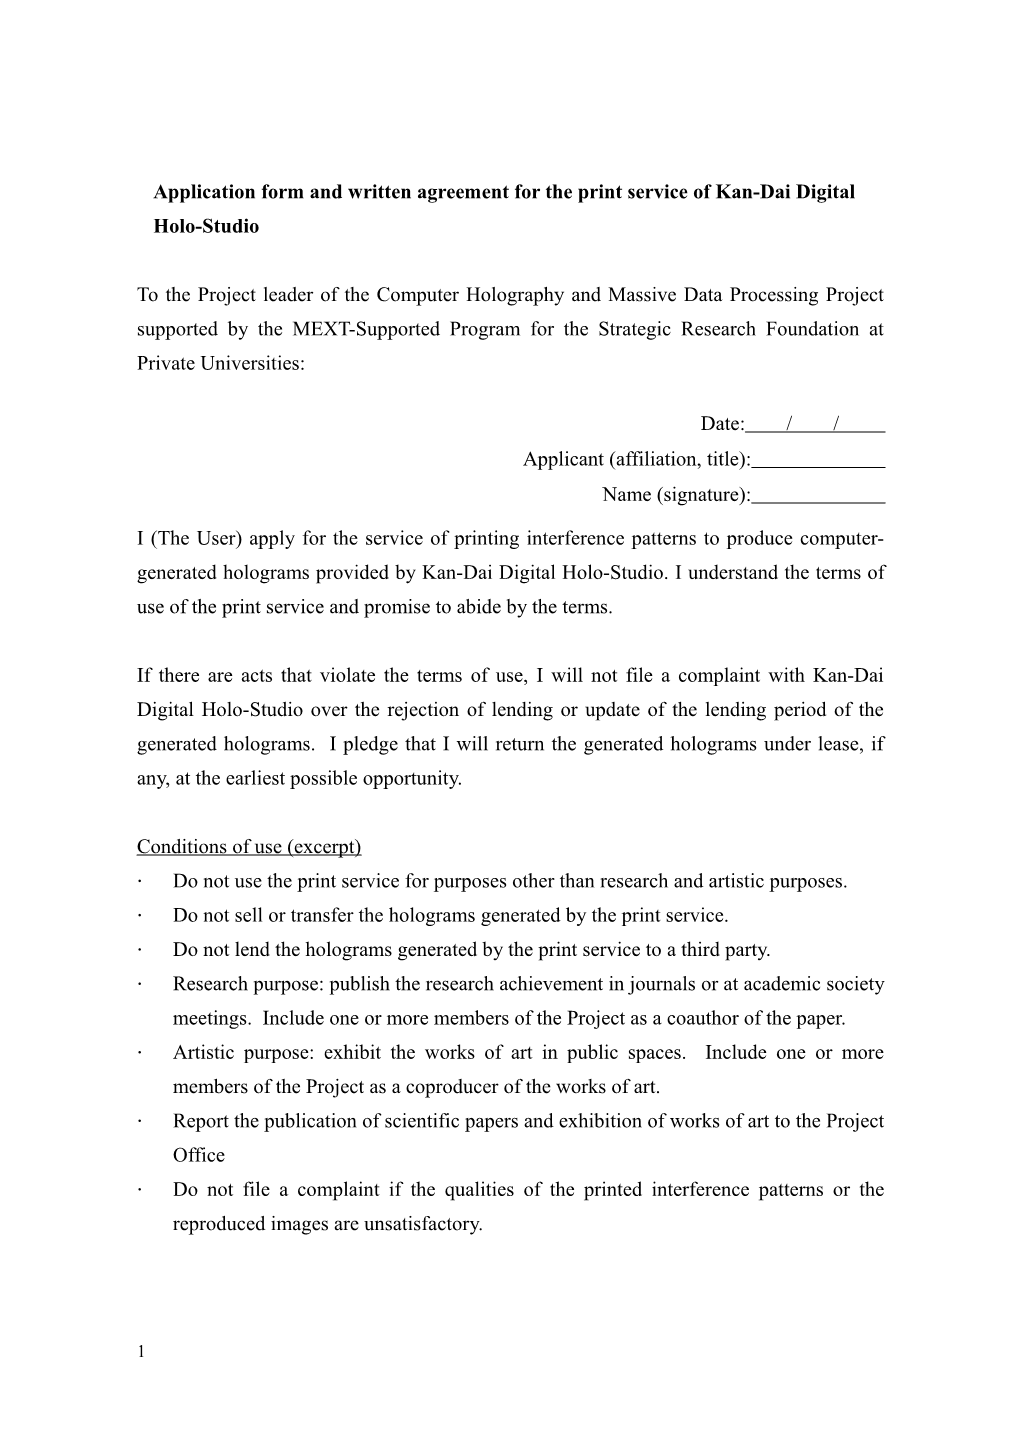 Application Form and Written Agreement for the Print Service of Kan-Dai Digital Holo-Studio